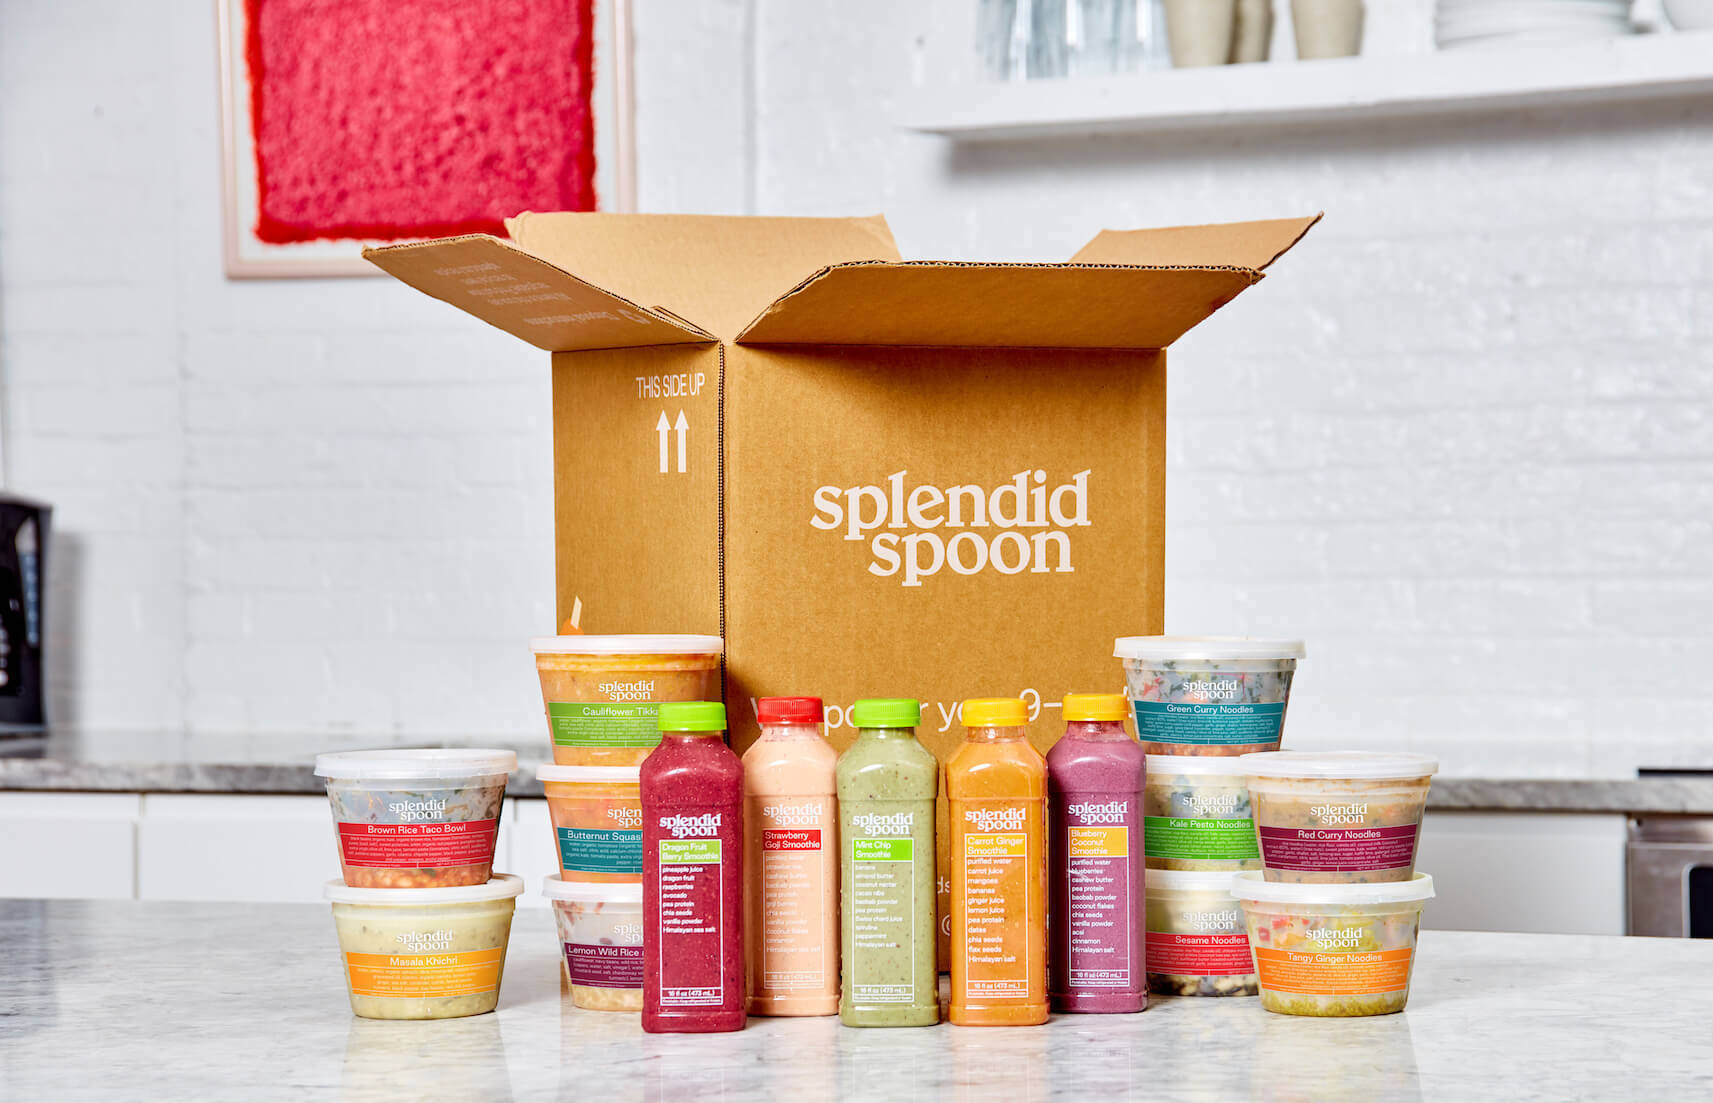 Splendid spoon offers a wide variety of healthy meals, from breakfast to lunch and dinner.